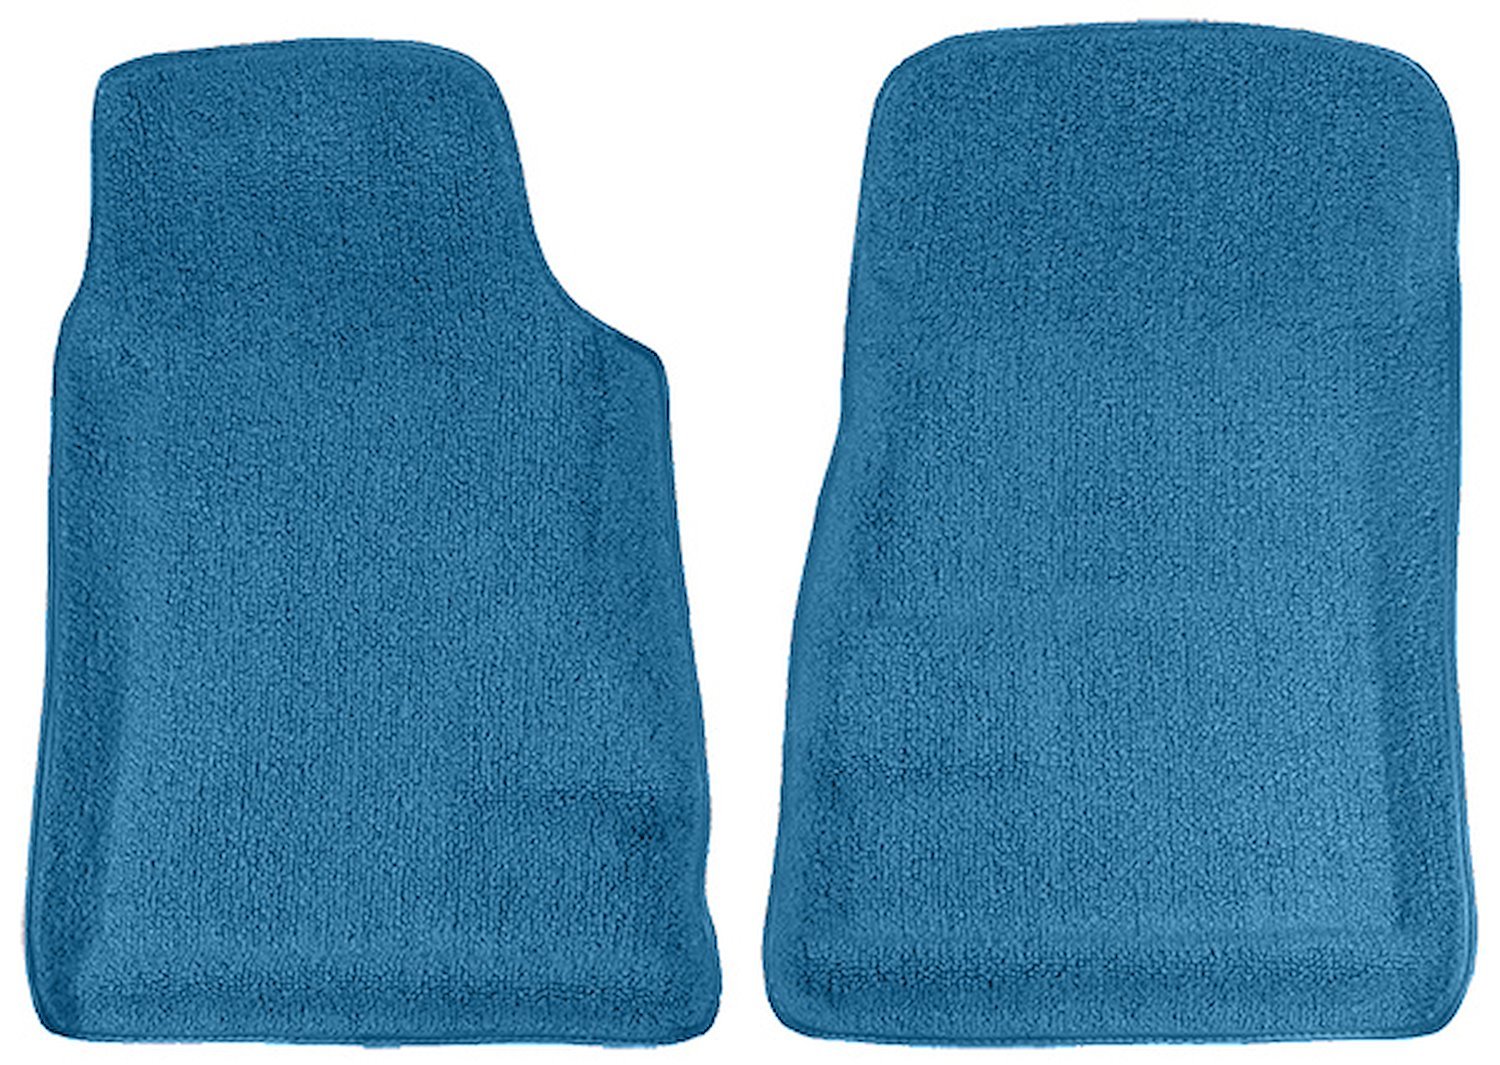 Contour Molded Loop Floor Mats for 1967-1969 Chevy Camaro, Ponitac Firebird/Trans Am [2-Piece, Waterproof Backing, Bright Blue]